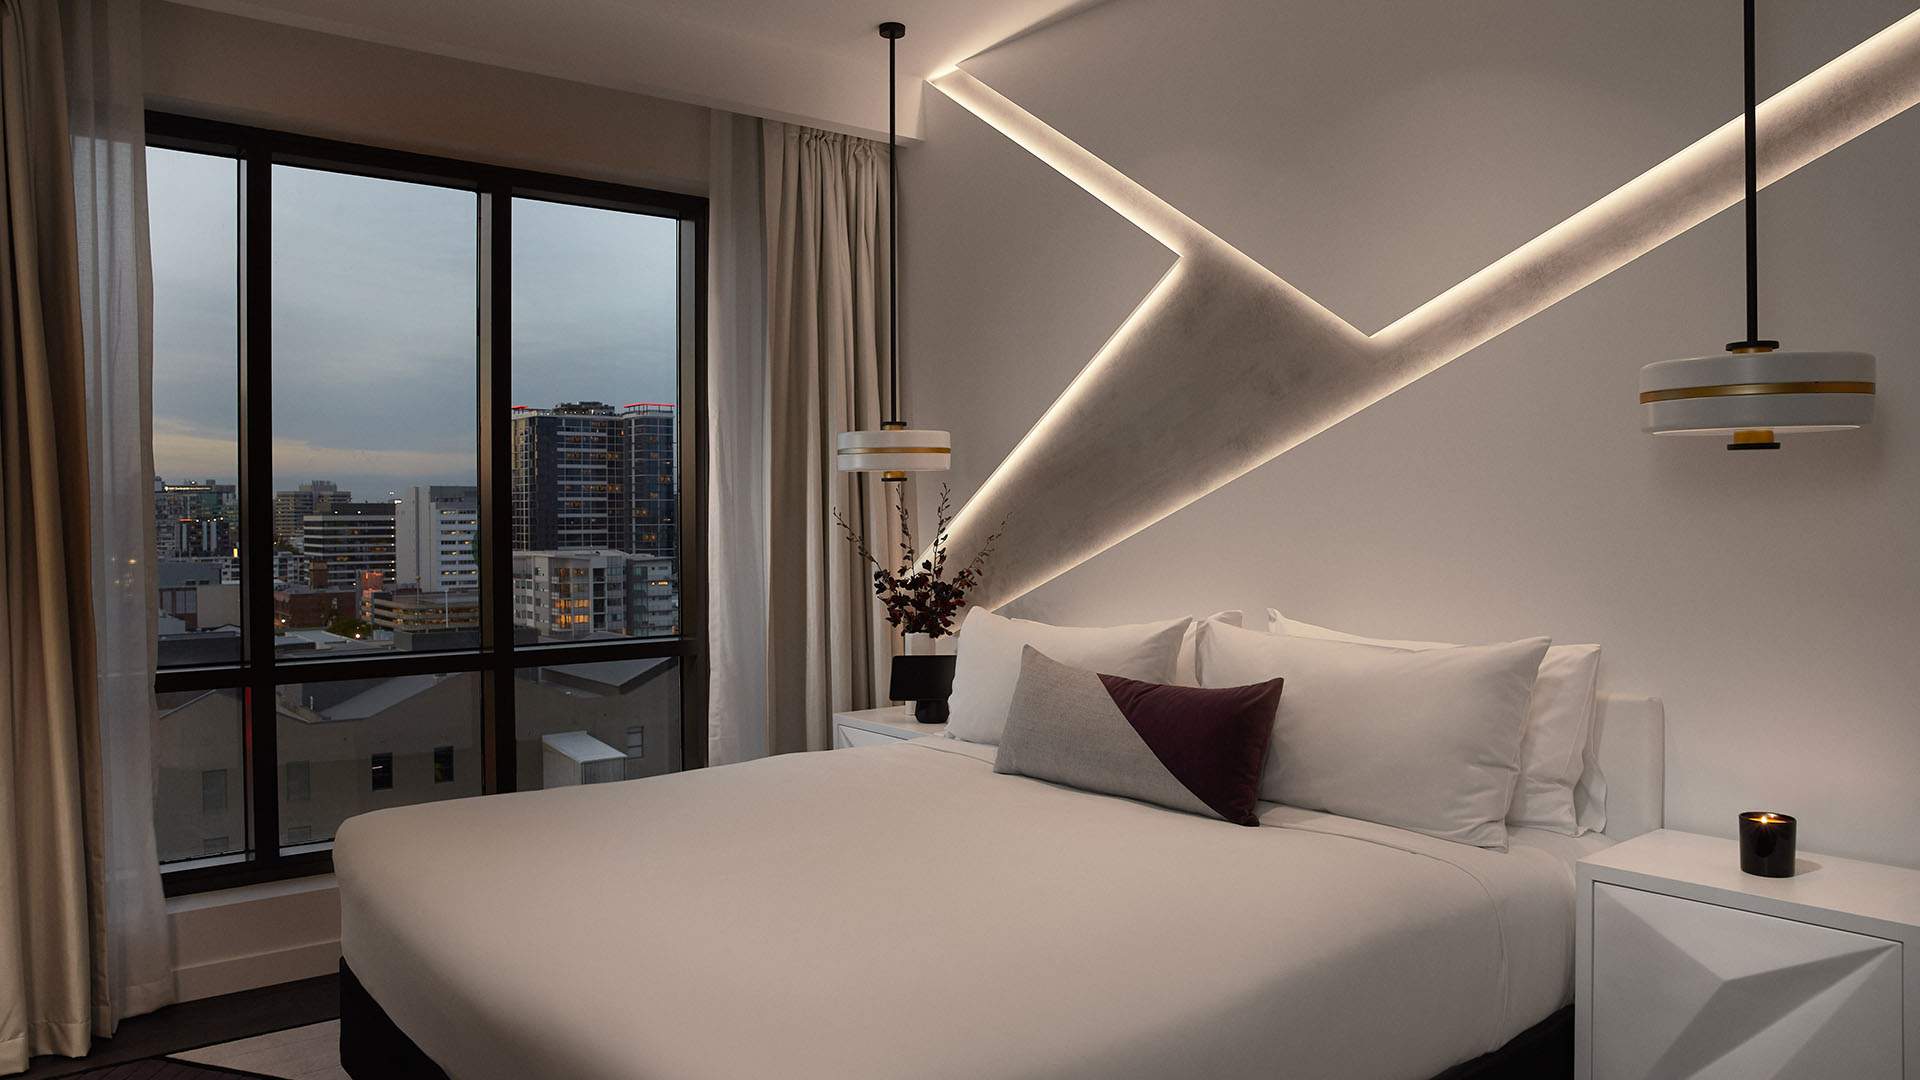 Hotel X Is Fortitude Valley's Soon-to-Open New Hotel with a French Restaurant and Rooftop Bar